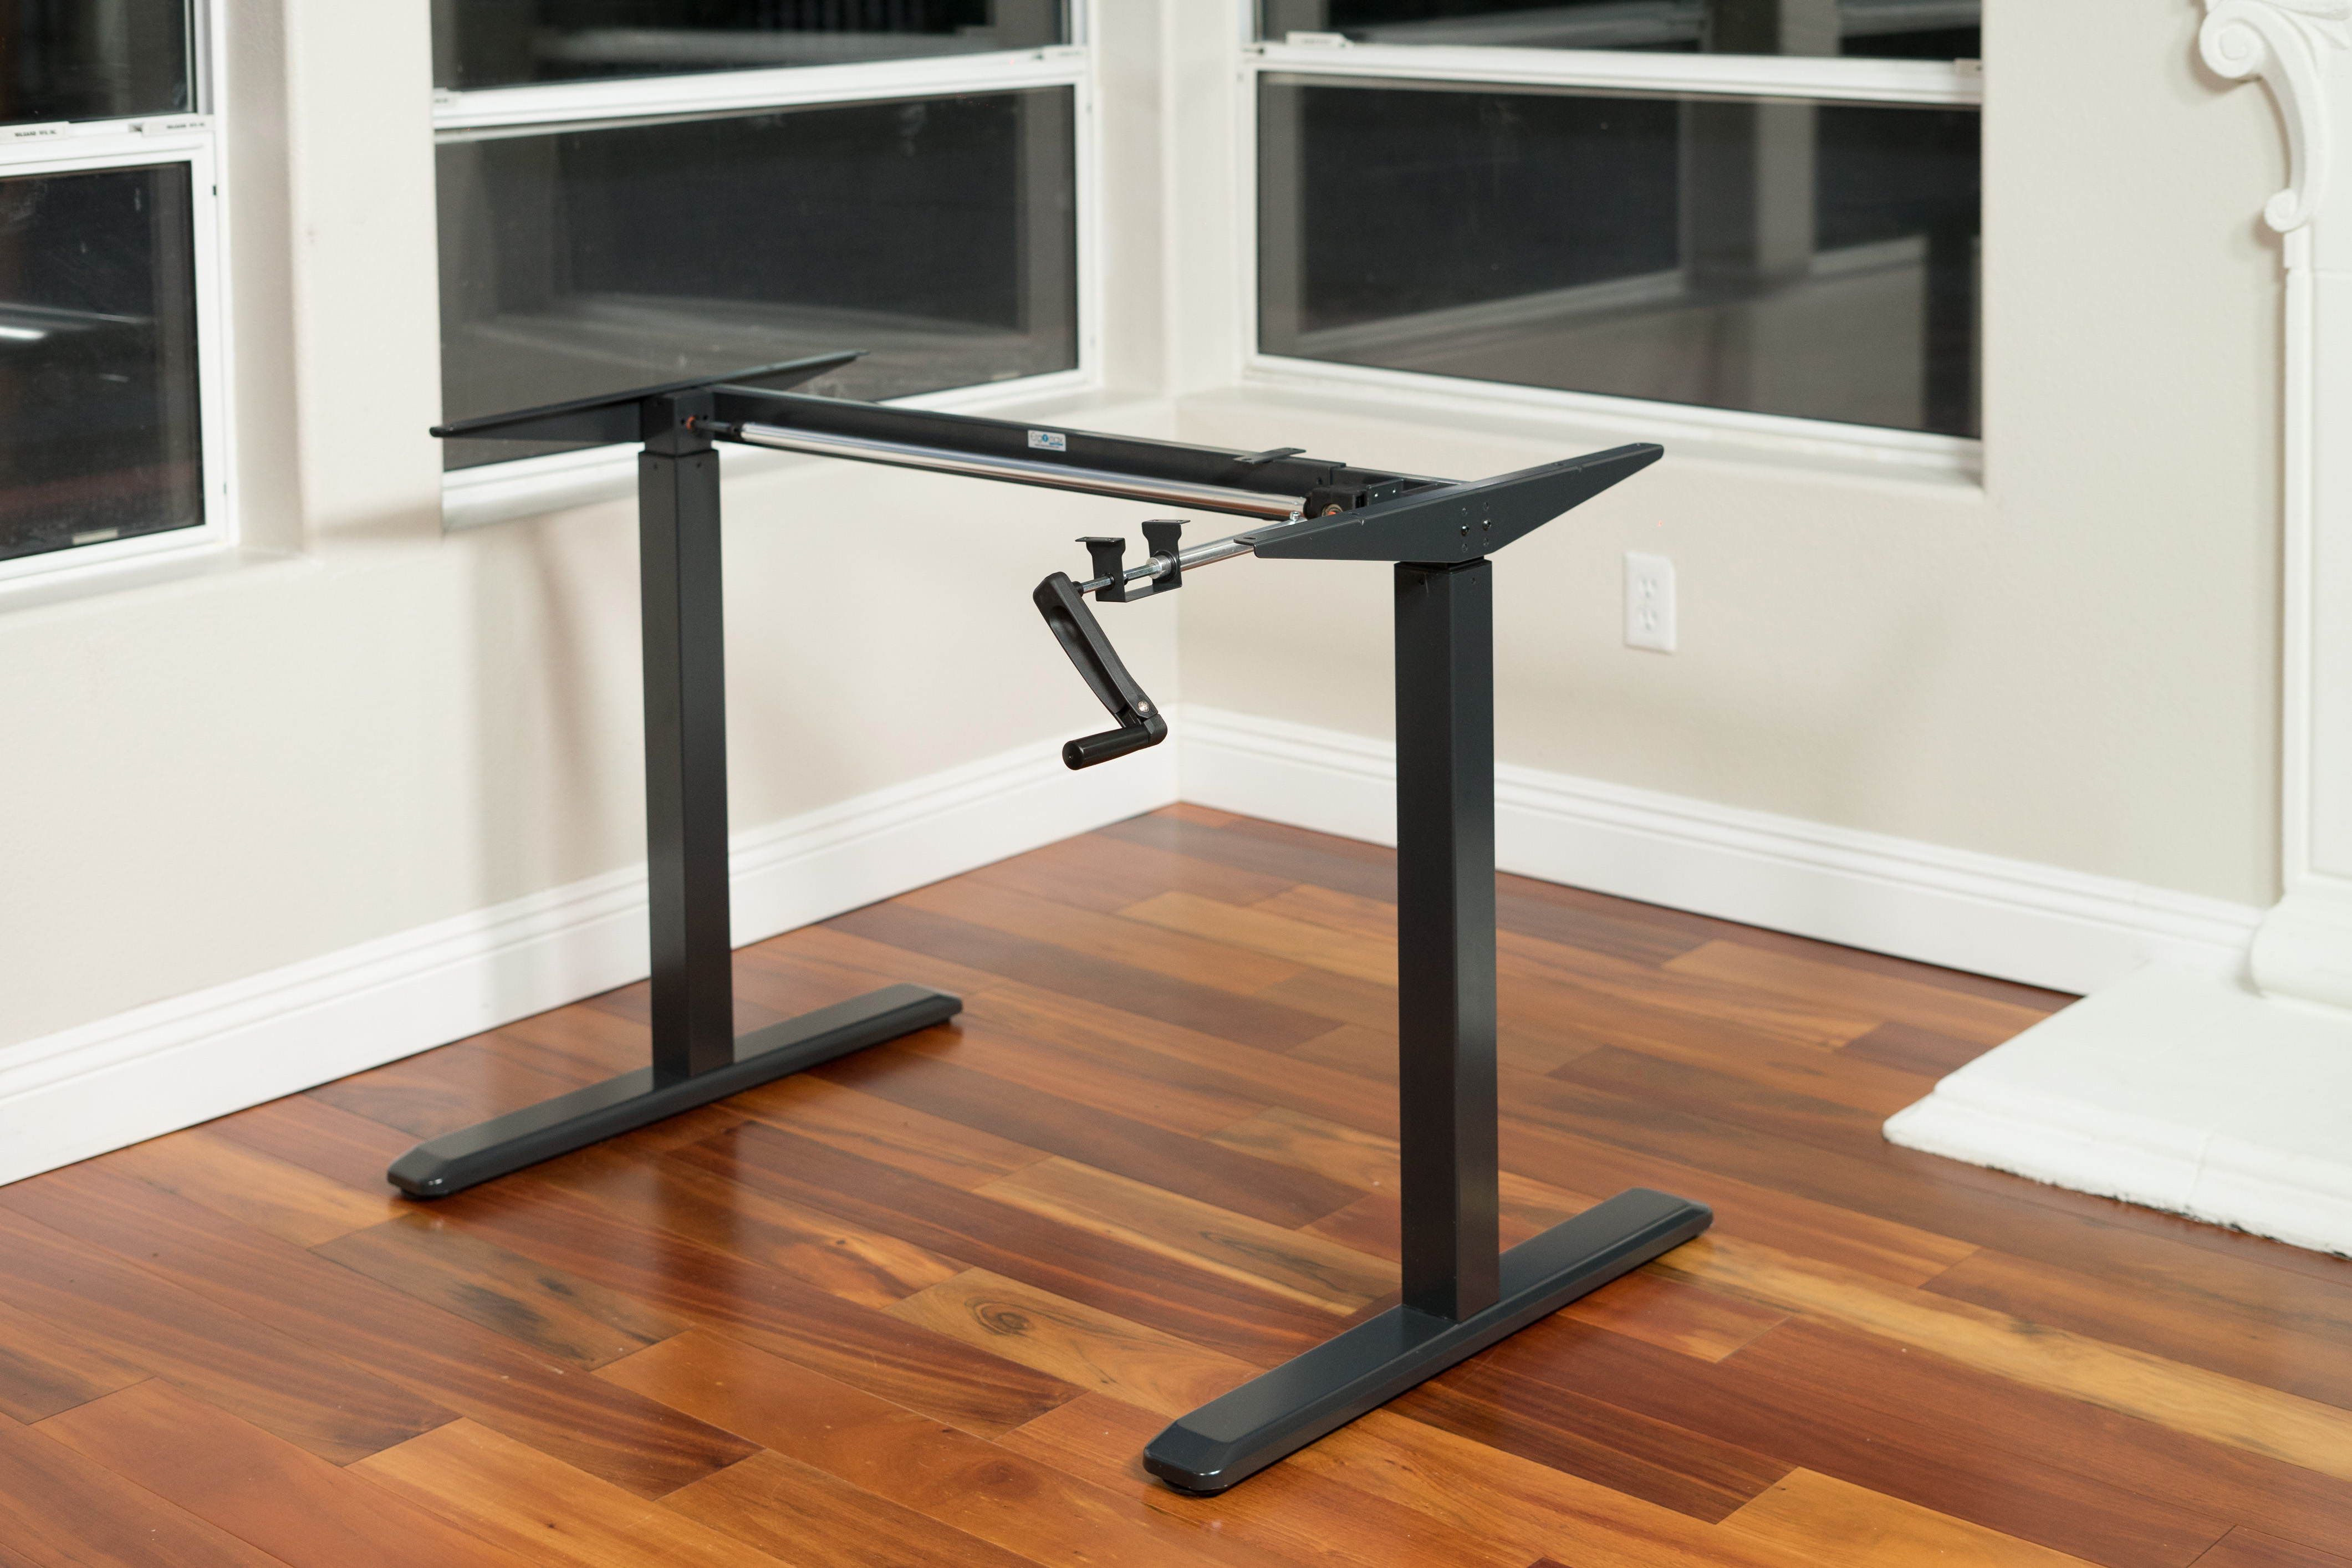 ErgoMax Black Height Adjustable Crank Desk Frame, Tabletop Not Included, 45 Inch Max Height - image 3 of 8